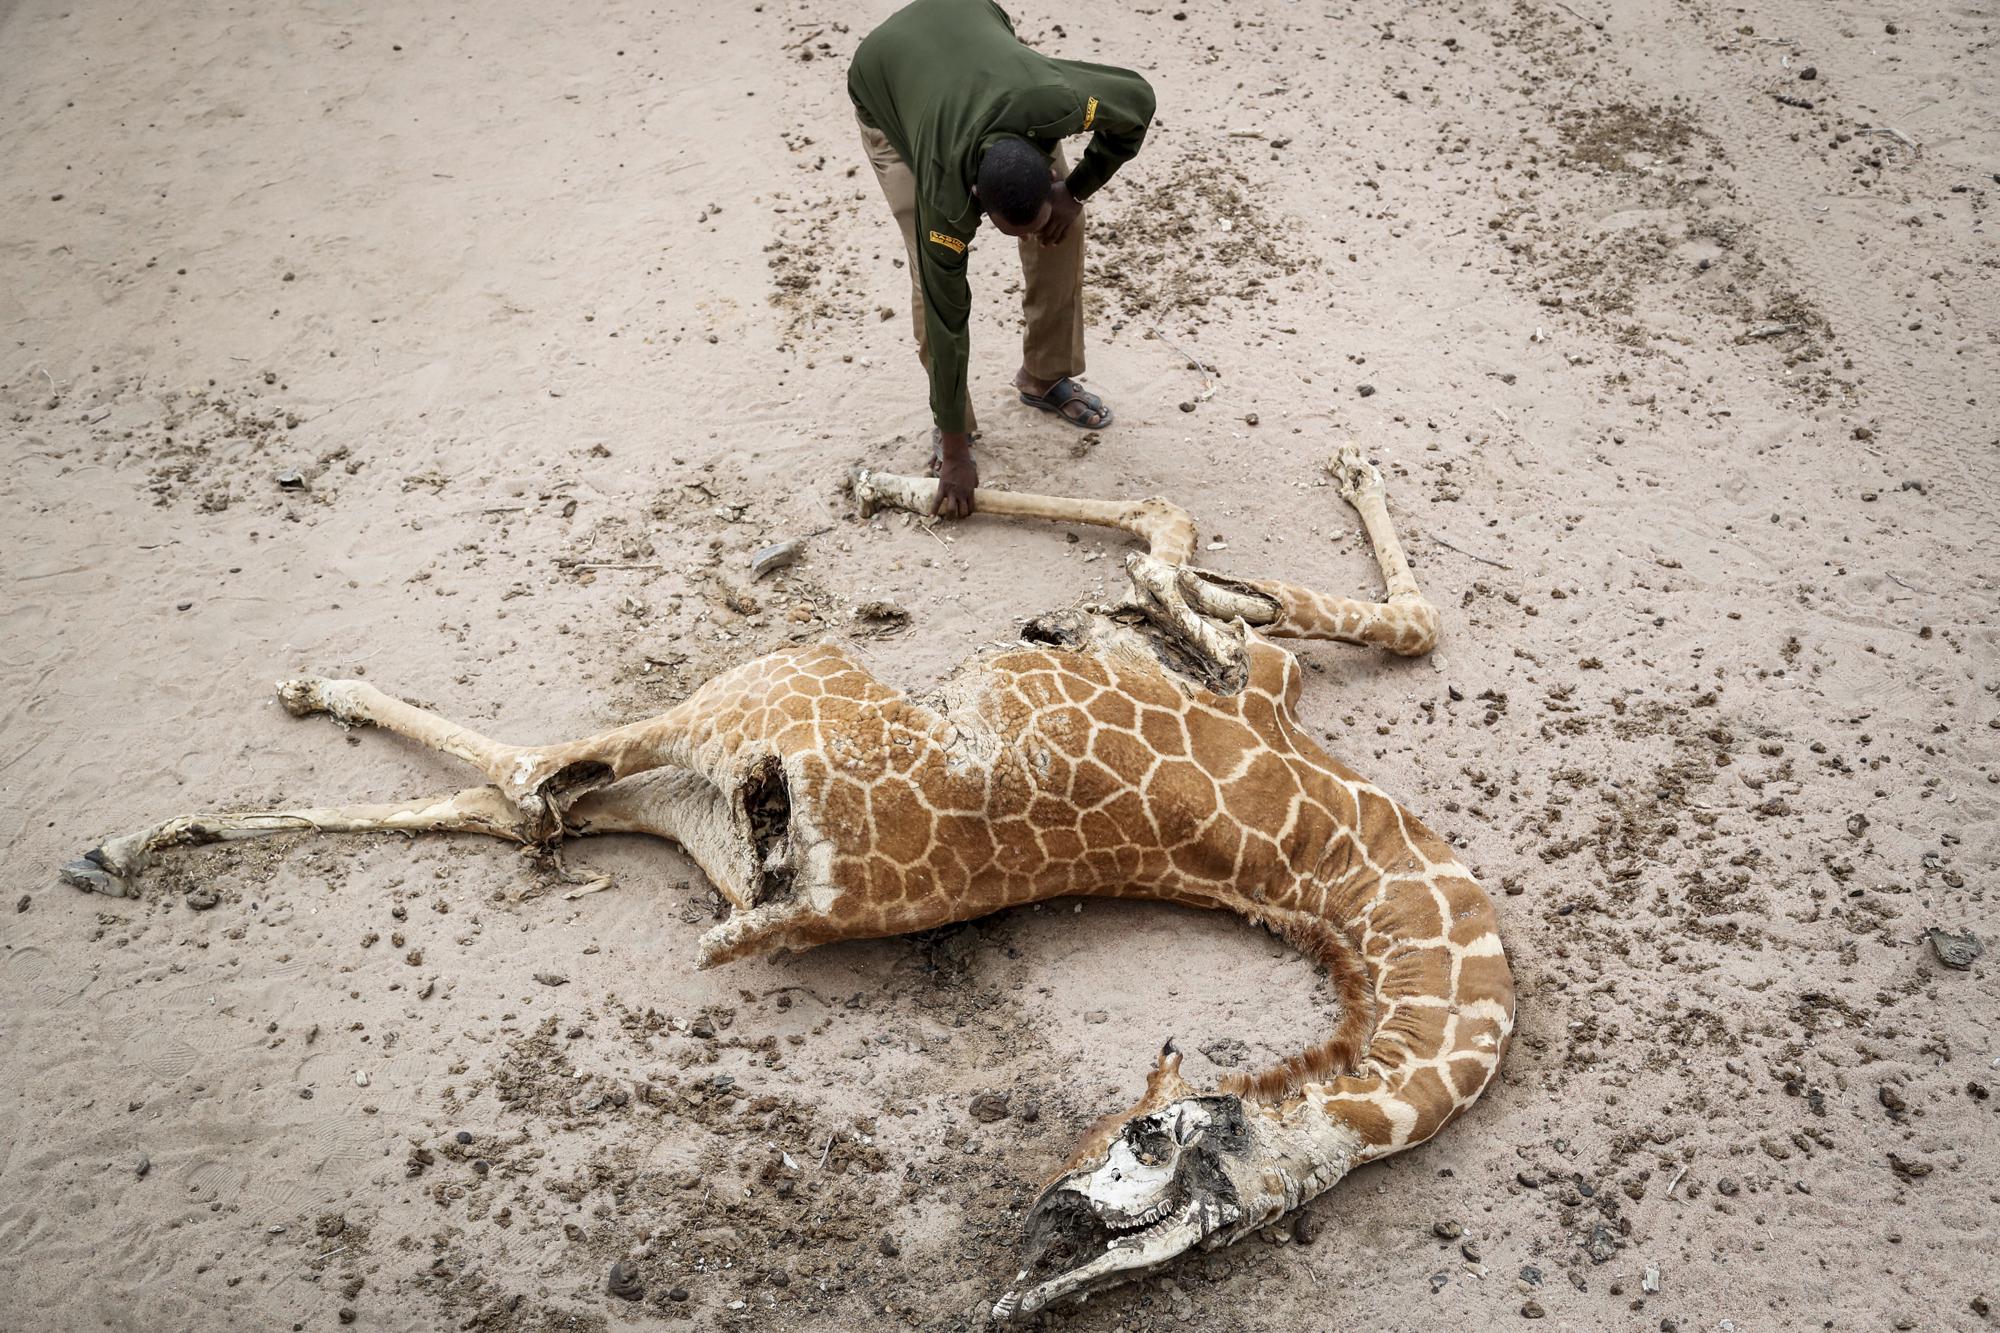 FILE - Mohamed Mohamud, a ranger from the Sabuli Wildlife Conservancy, looks at the carcass of a giraffe that died of hunger near Matana Village, Wajir County, Kenya, Monday, Oct. 25, 2021. The United Nations on Monday, Feb. 28, 2022, released a new report on climate change. (AP Photo/Brian Inganga, File)